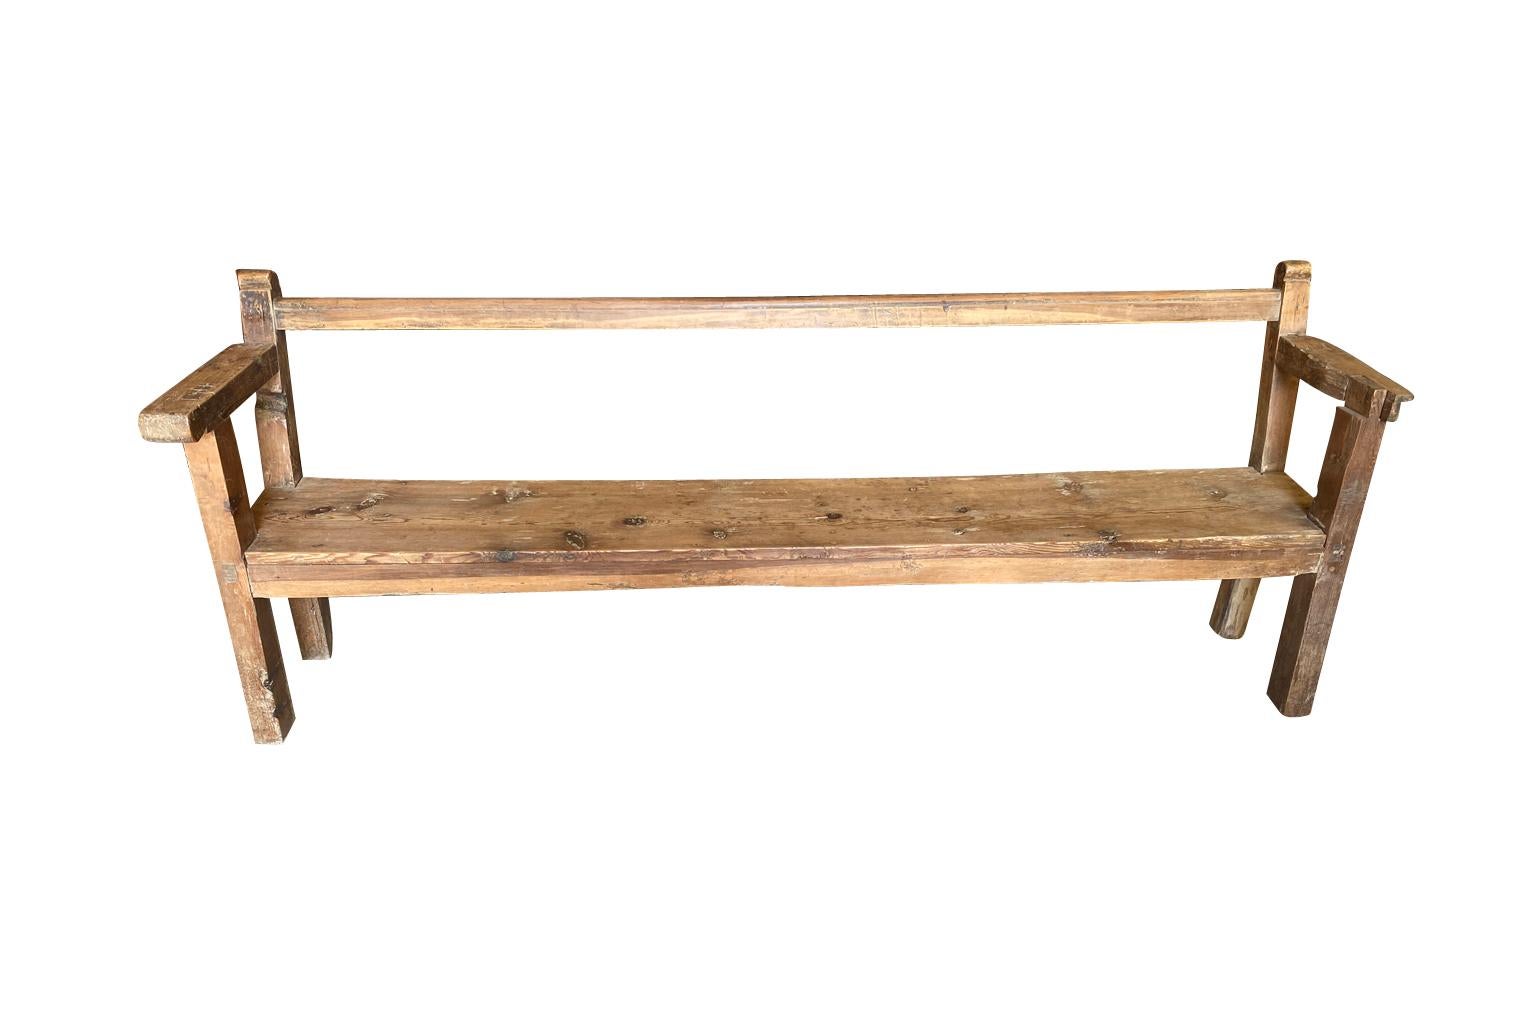 A very handsome 18th century primitive bench from the Catalan region of Spain.  Nicely constructed from Meleze - a very dense pine.  Very rich patina.  The seat height is 16 5/8